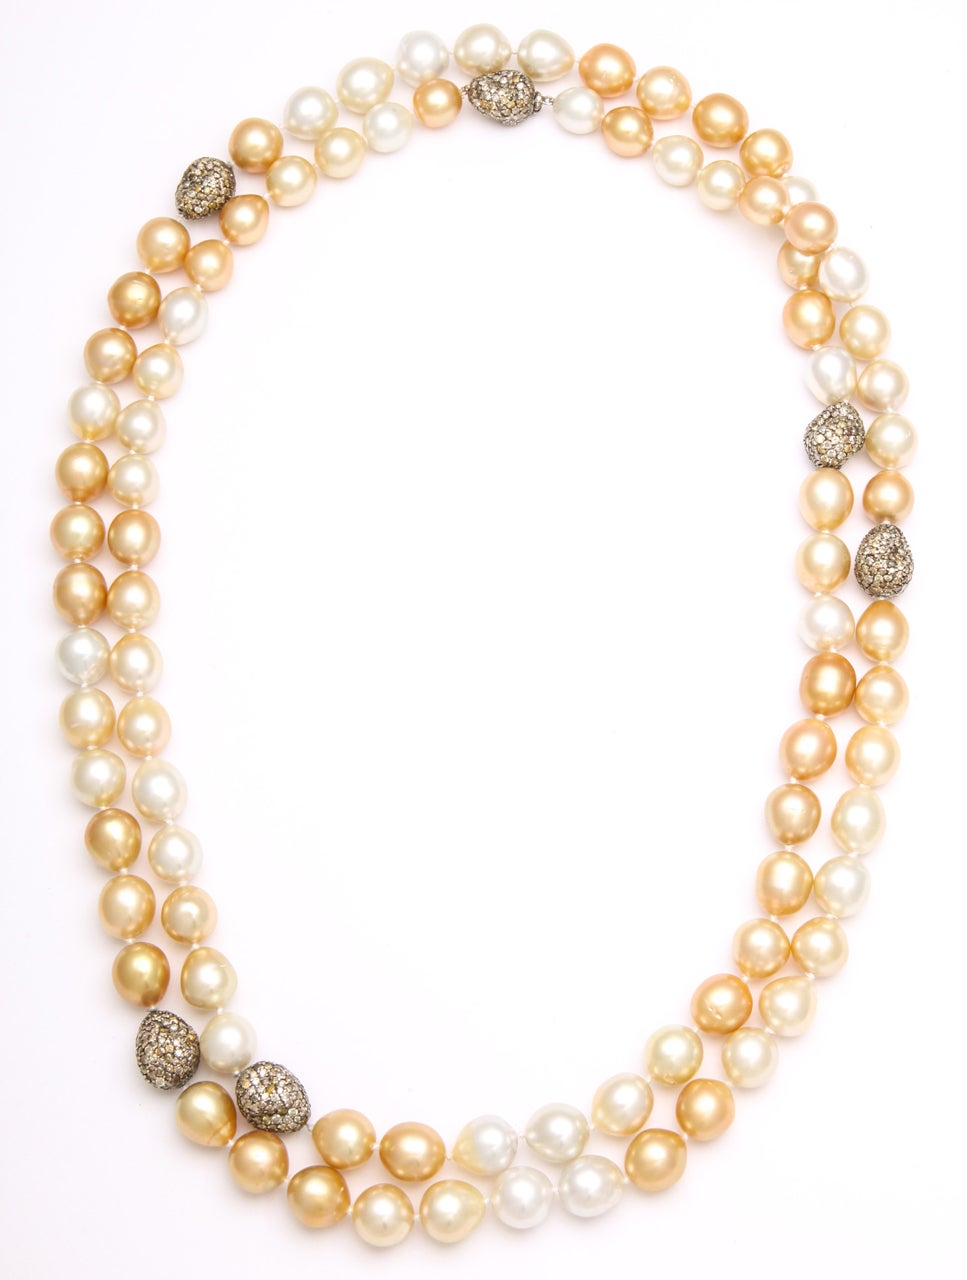 Natural Philippian South Sea Pearls ranging from 11-13 mm with touches of diamond nuggets weighing approximately 16.5 carats.